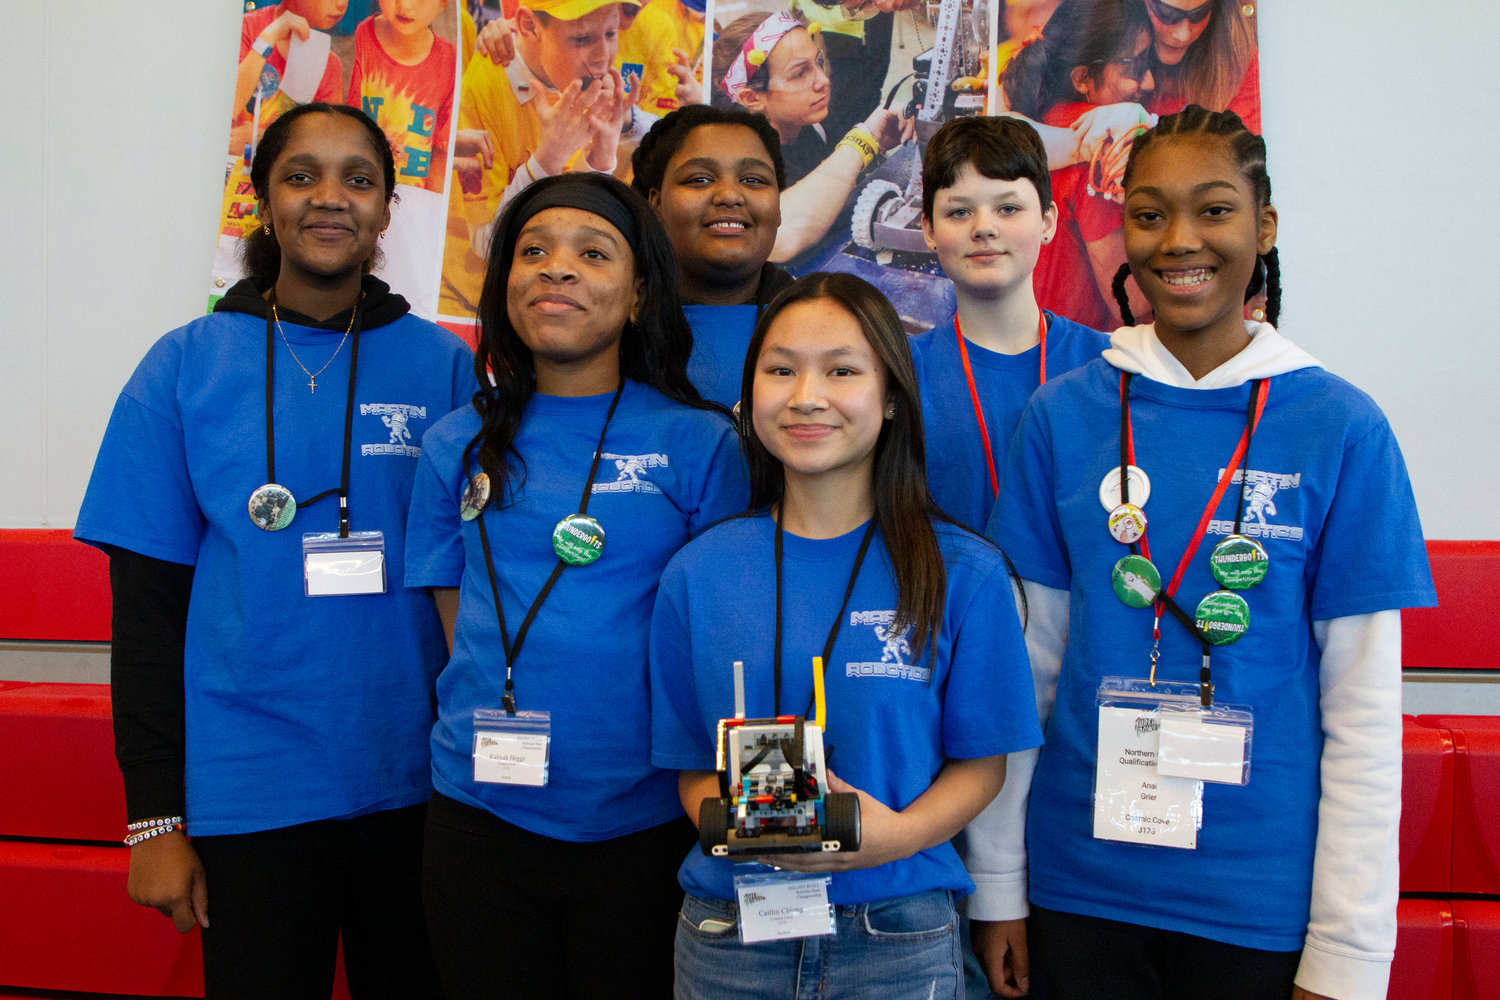 The Martin Middle School “Cosmic Cove” team (from left to right) Whitney Monteiro-Cabral, Kaliyah Heggs, Wendy Monteiro-Cabral, Caitlin Chiong, Finn Trotter-Mayo, and Anai Greer.